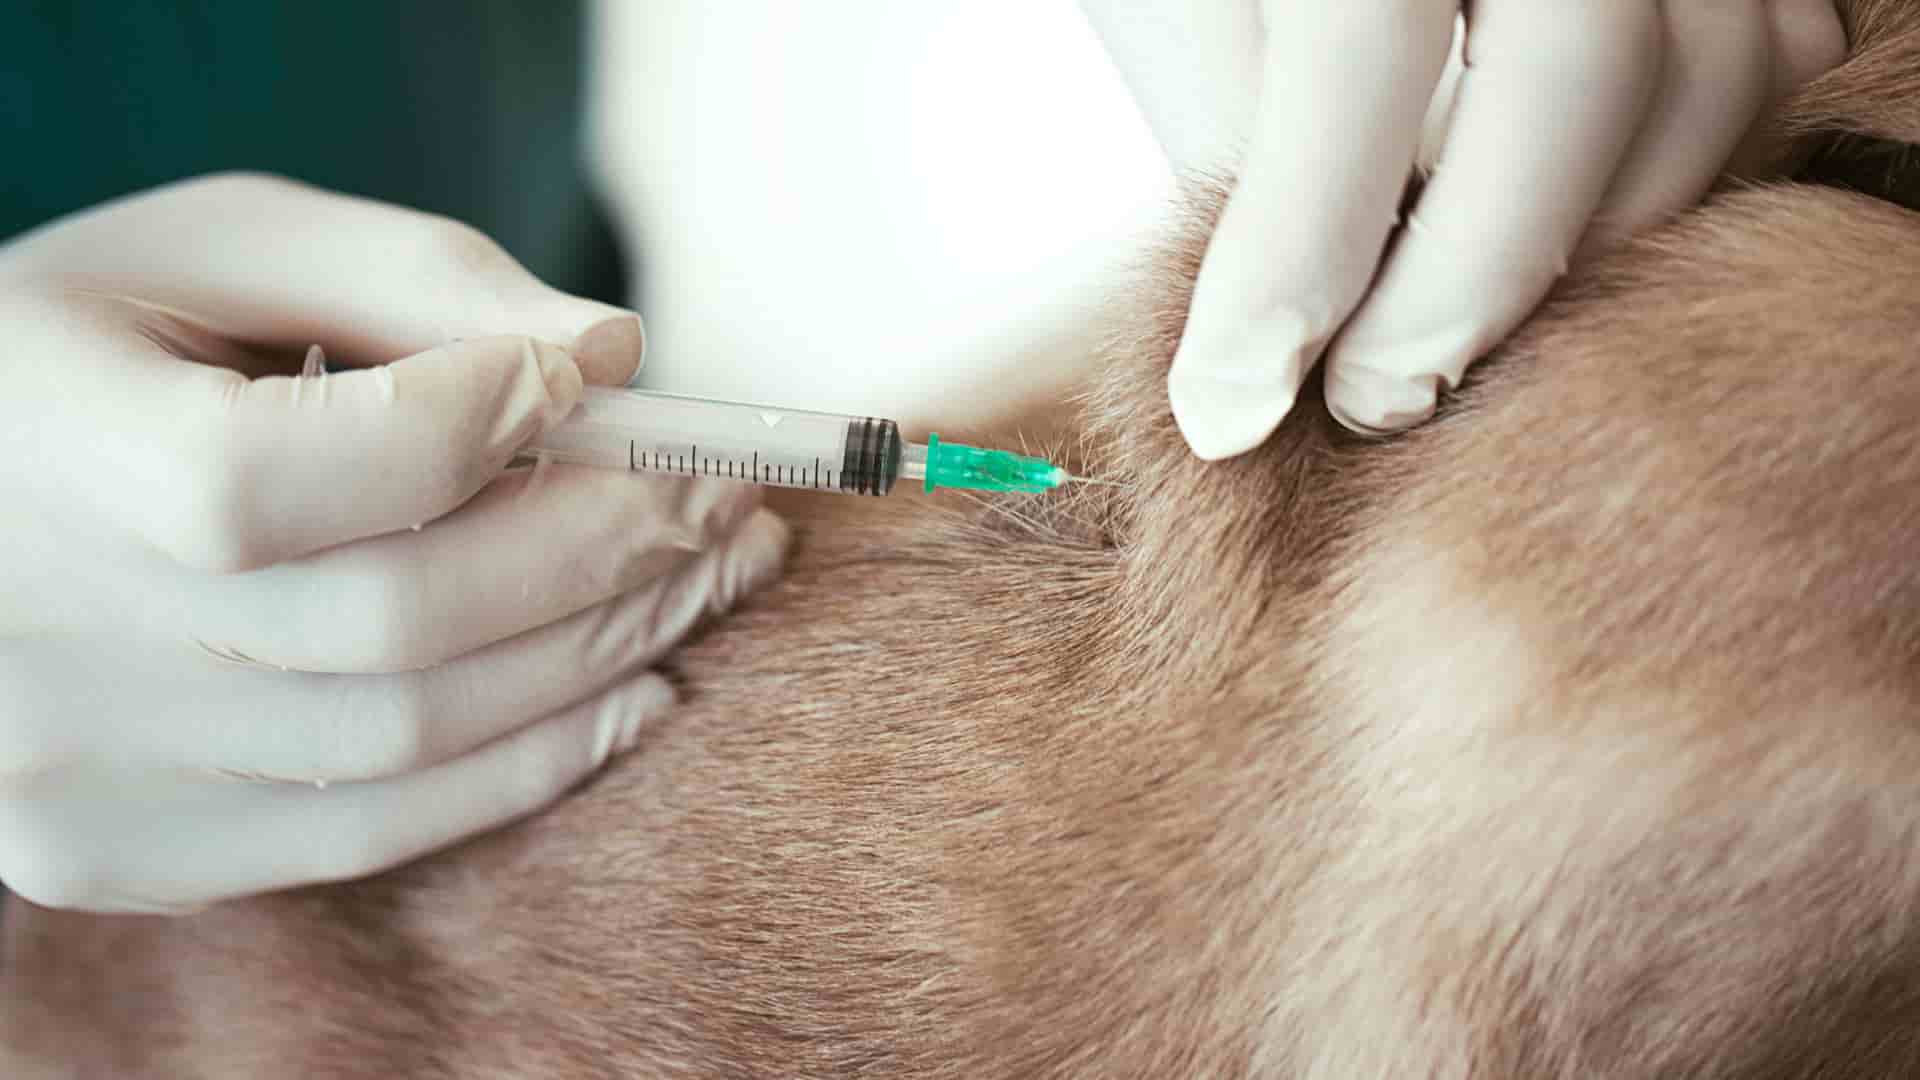 What vaccines does my dog need? Do dog vaccines cause cancer?